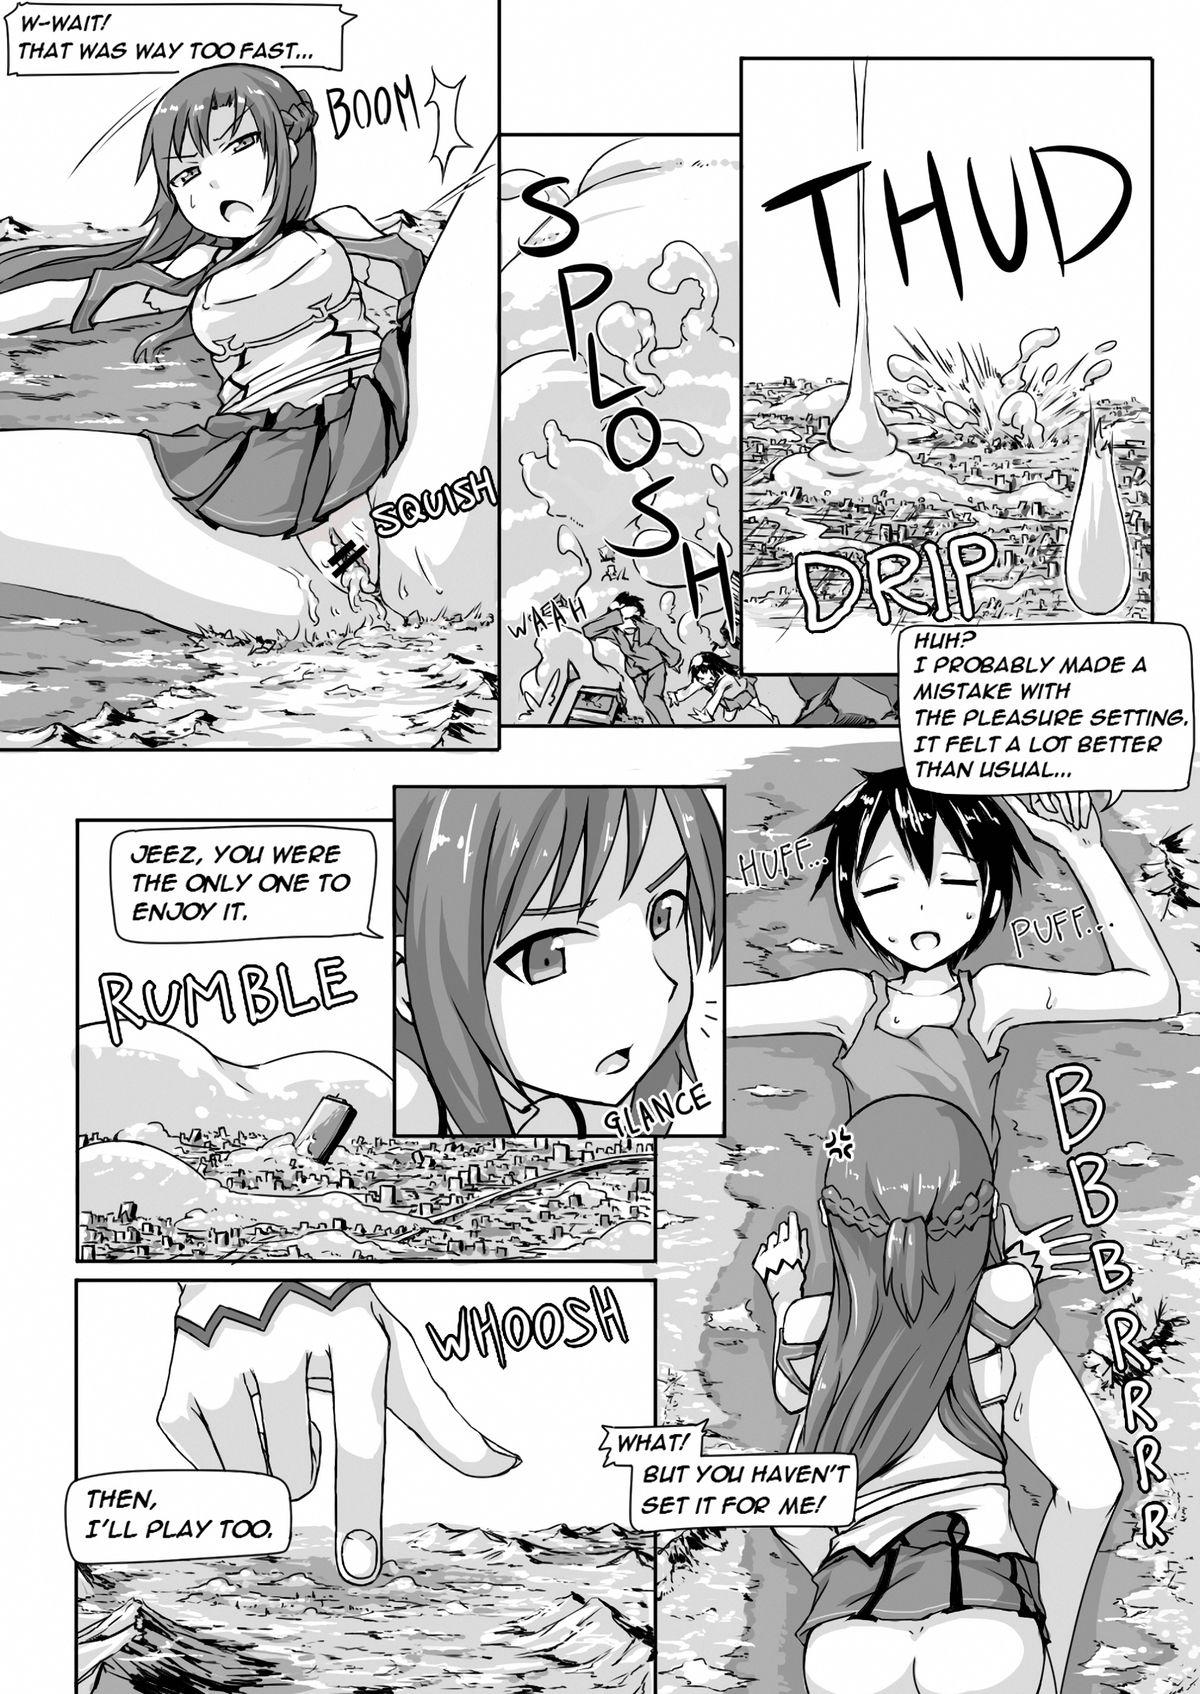 Masterbate Size chaned Asuna wants to do Anything - Sword art online Highheels - Page 6